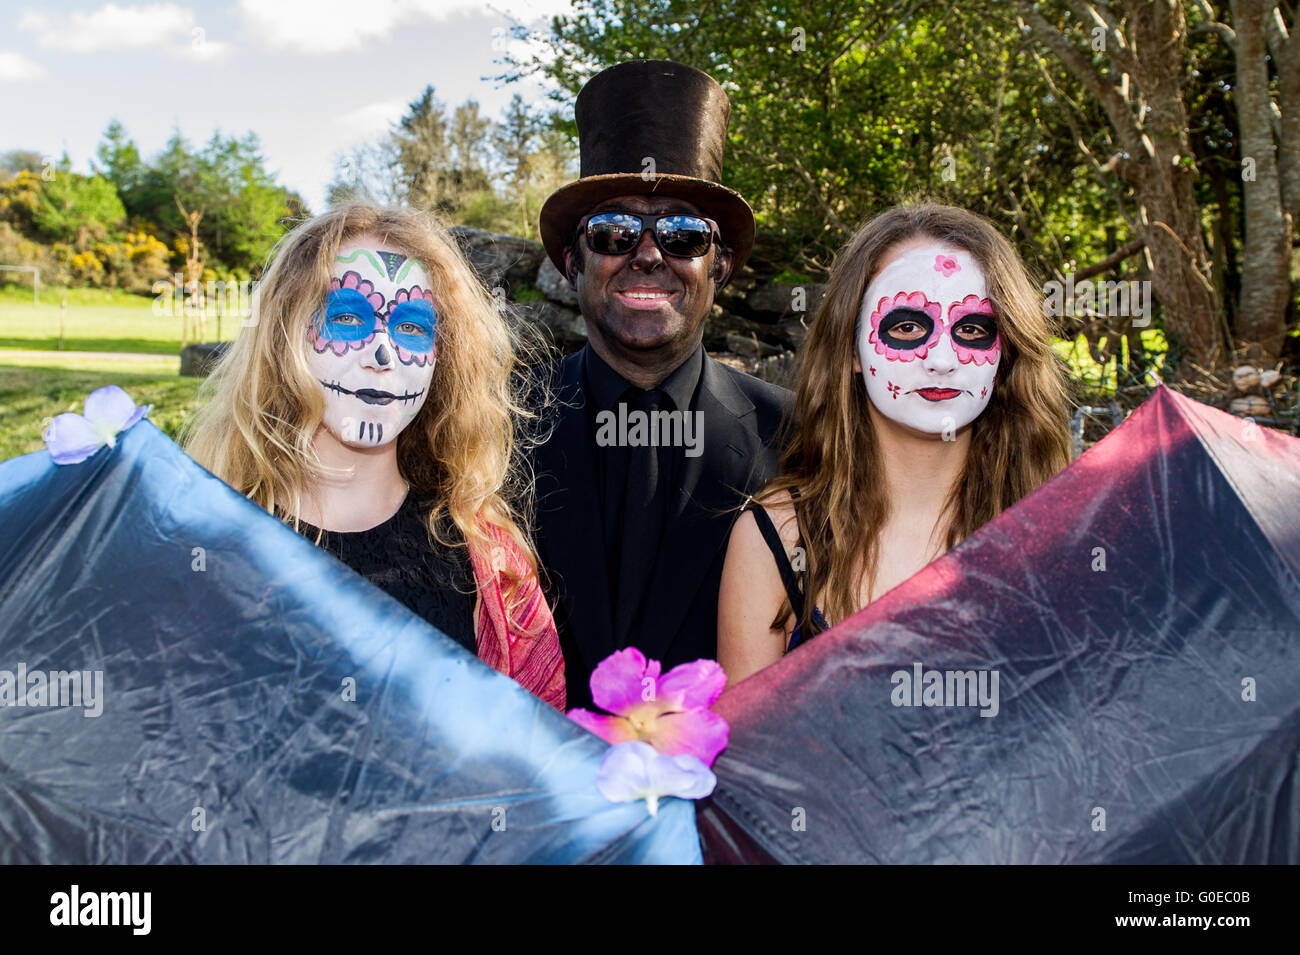 Ballydehob, Ireland. 30th April 2016. Dressed up and faces painted for the Ballydehob Jazz Festival 'Day of the Dead' themed New Orleans Style Jazz Funeral were Keira Sievert; Pall Bearer Dominic Murray and Domino Roe, all from Ballydehob. Credit: Andy Gibson/Alamy Live News Stock Photo